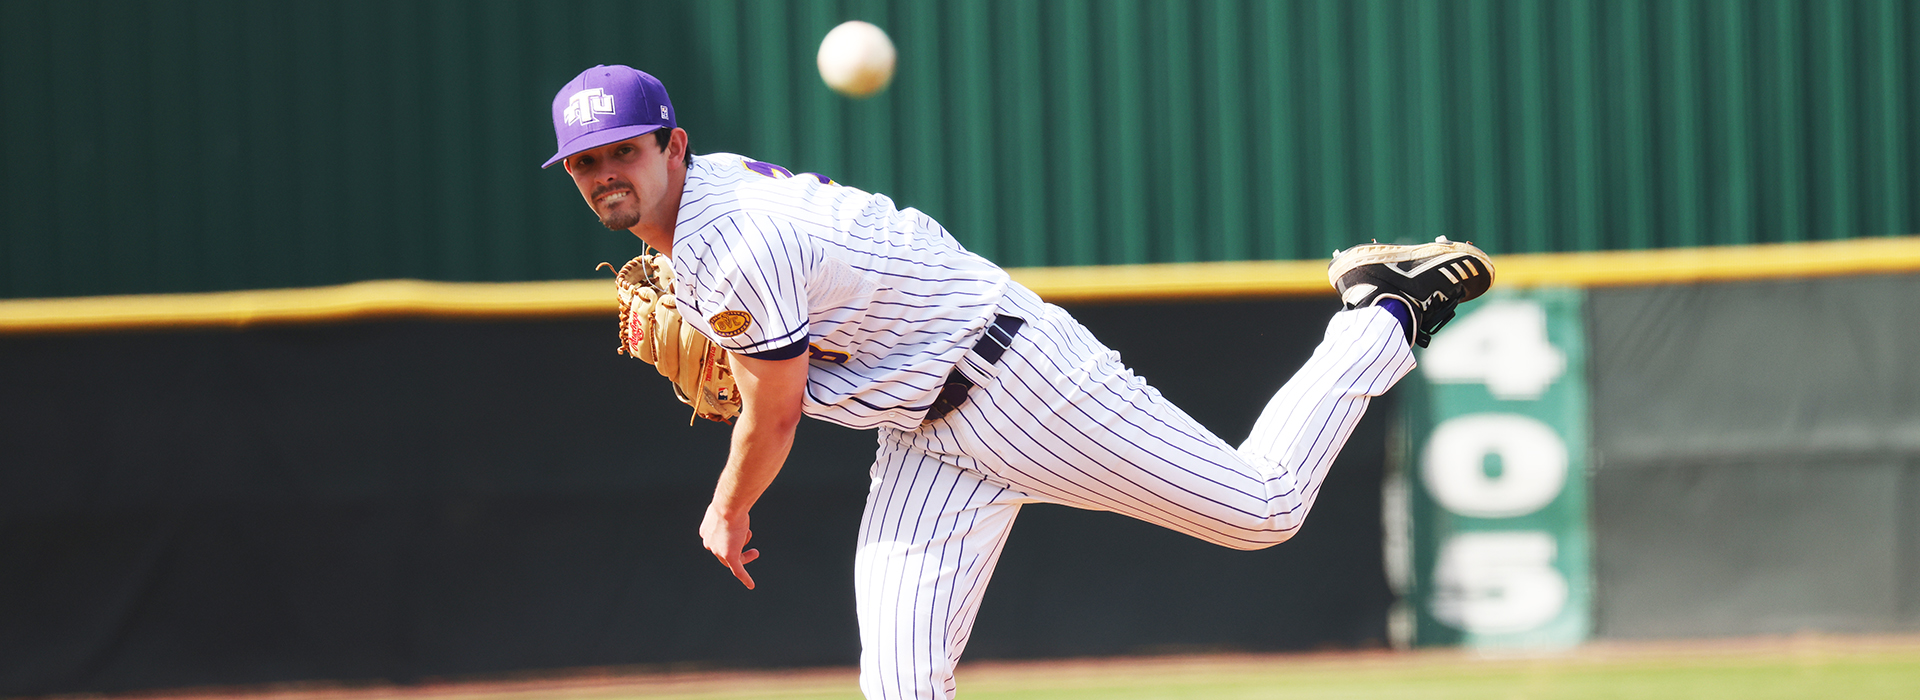 Tech baseball hits the road for in-state weekend series with ETSU